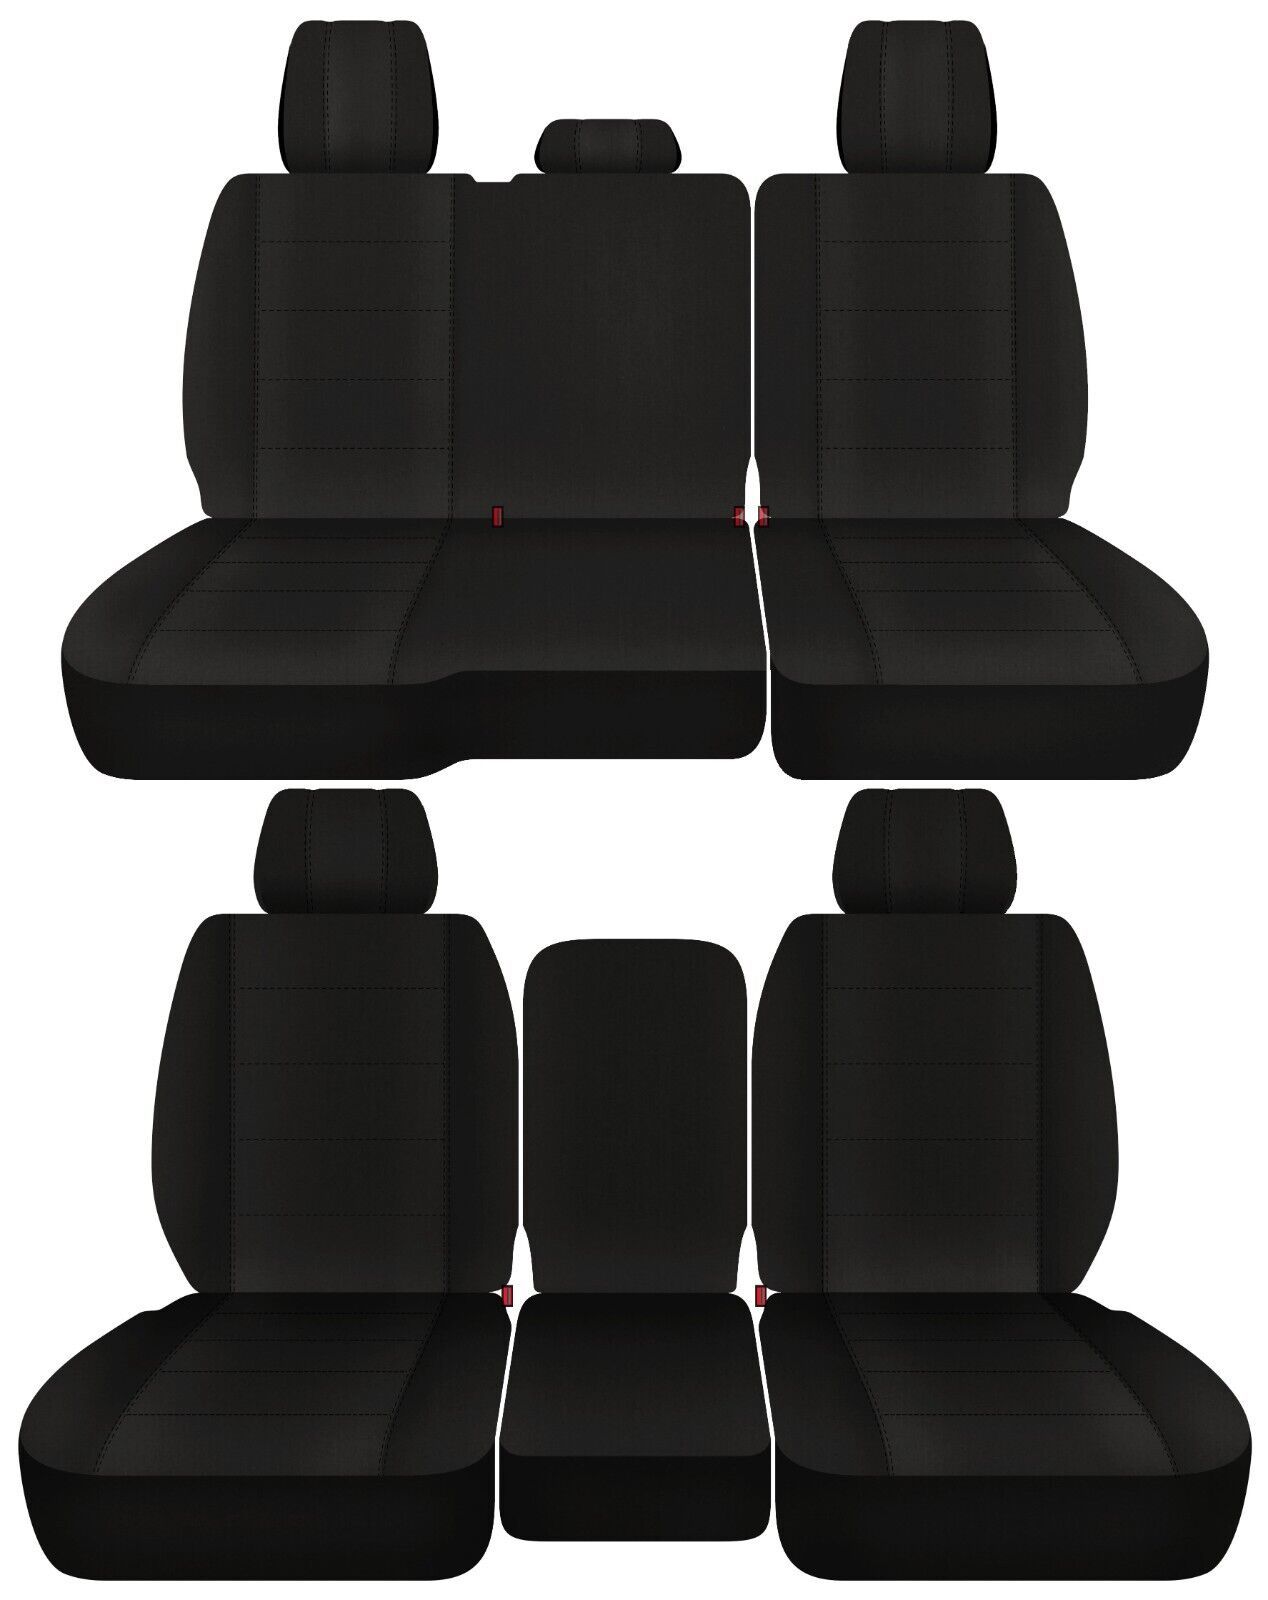 Front and Rear car seat covers Fits 2003 Dodge Ram 1500/2500/3500  Solid black